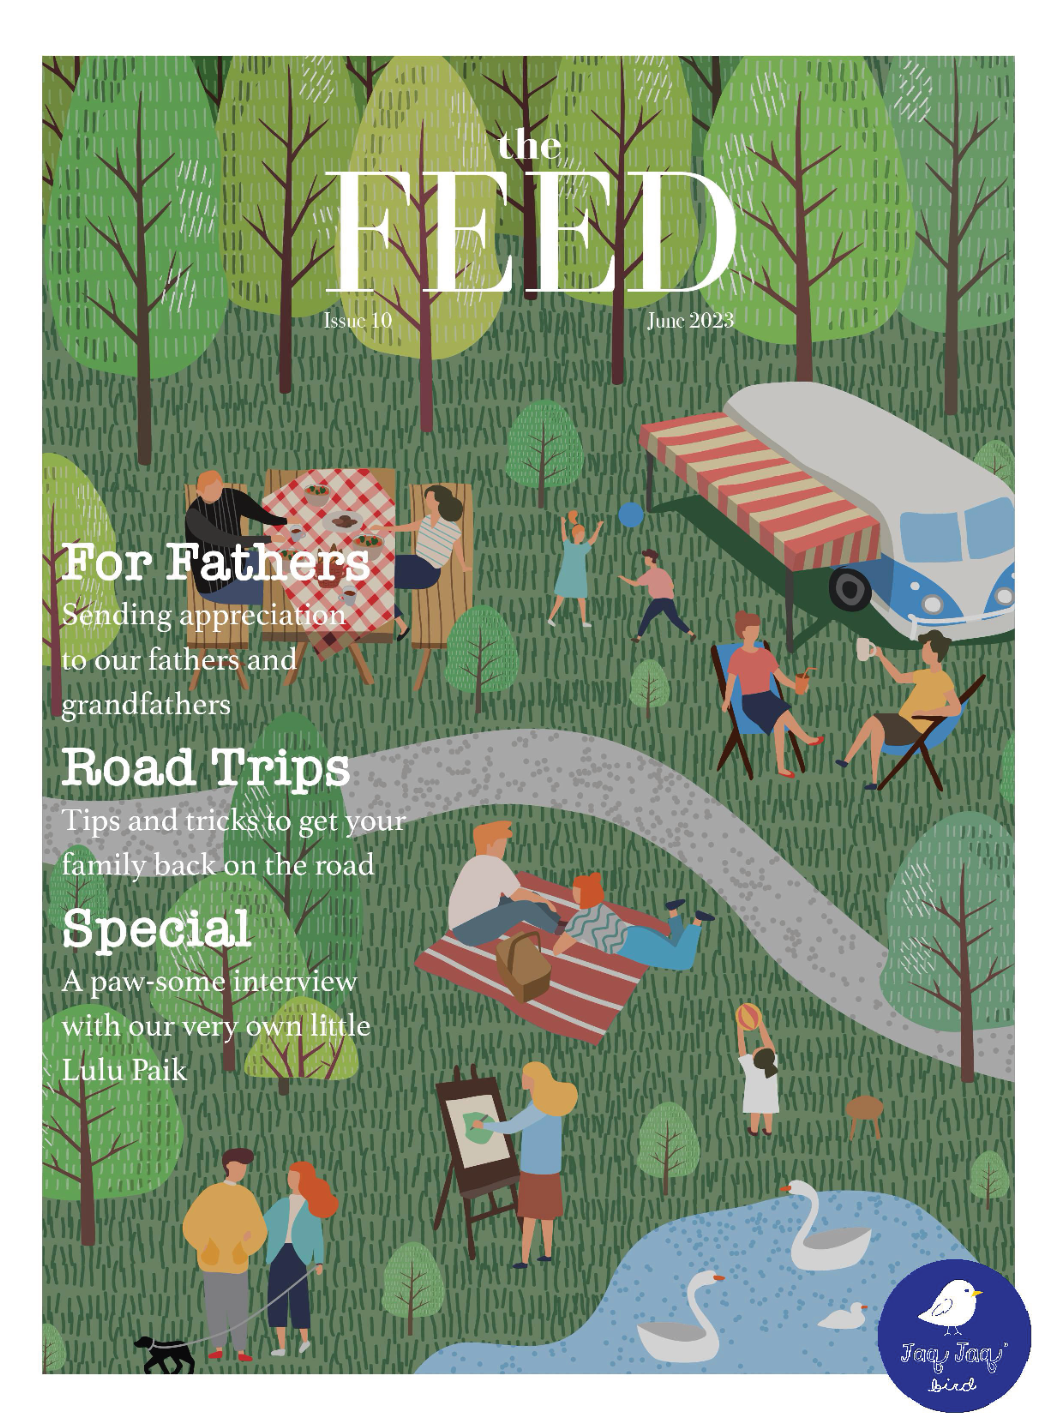 THE FEED by Jaq Jaq Bird, June 2023: Issue 10